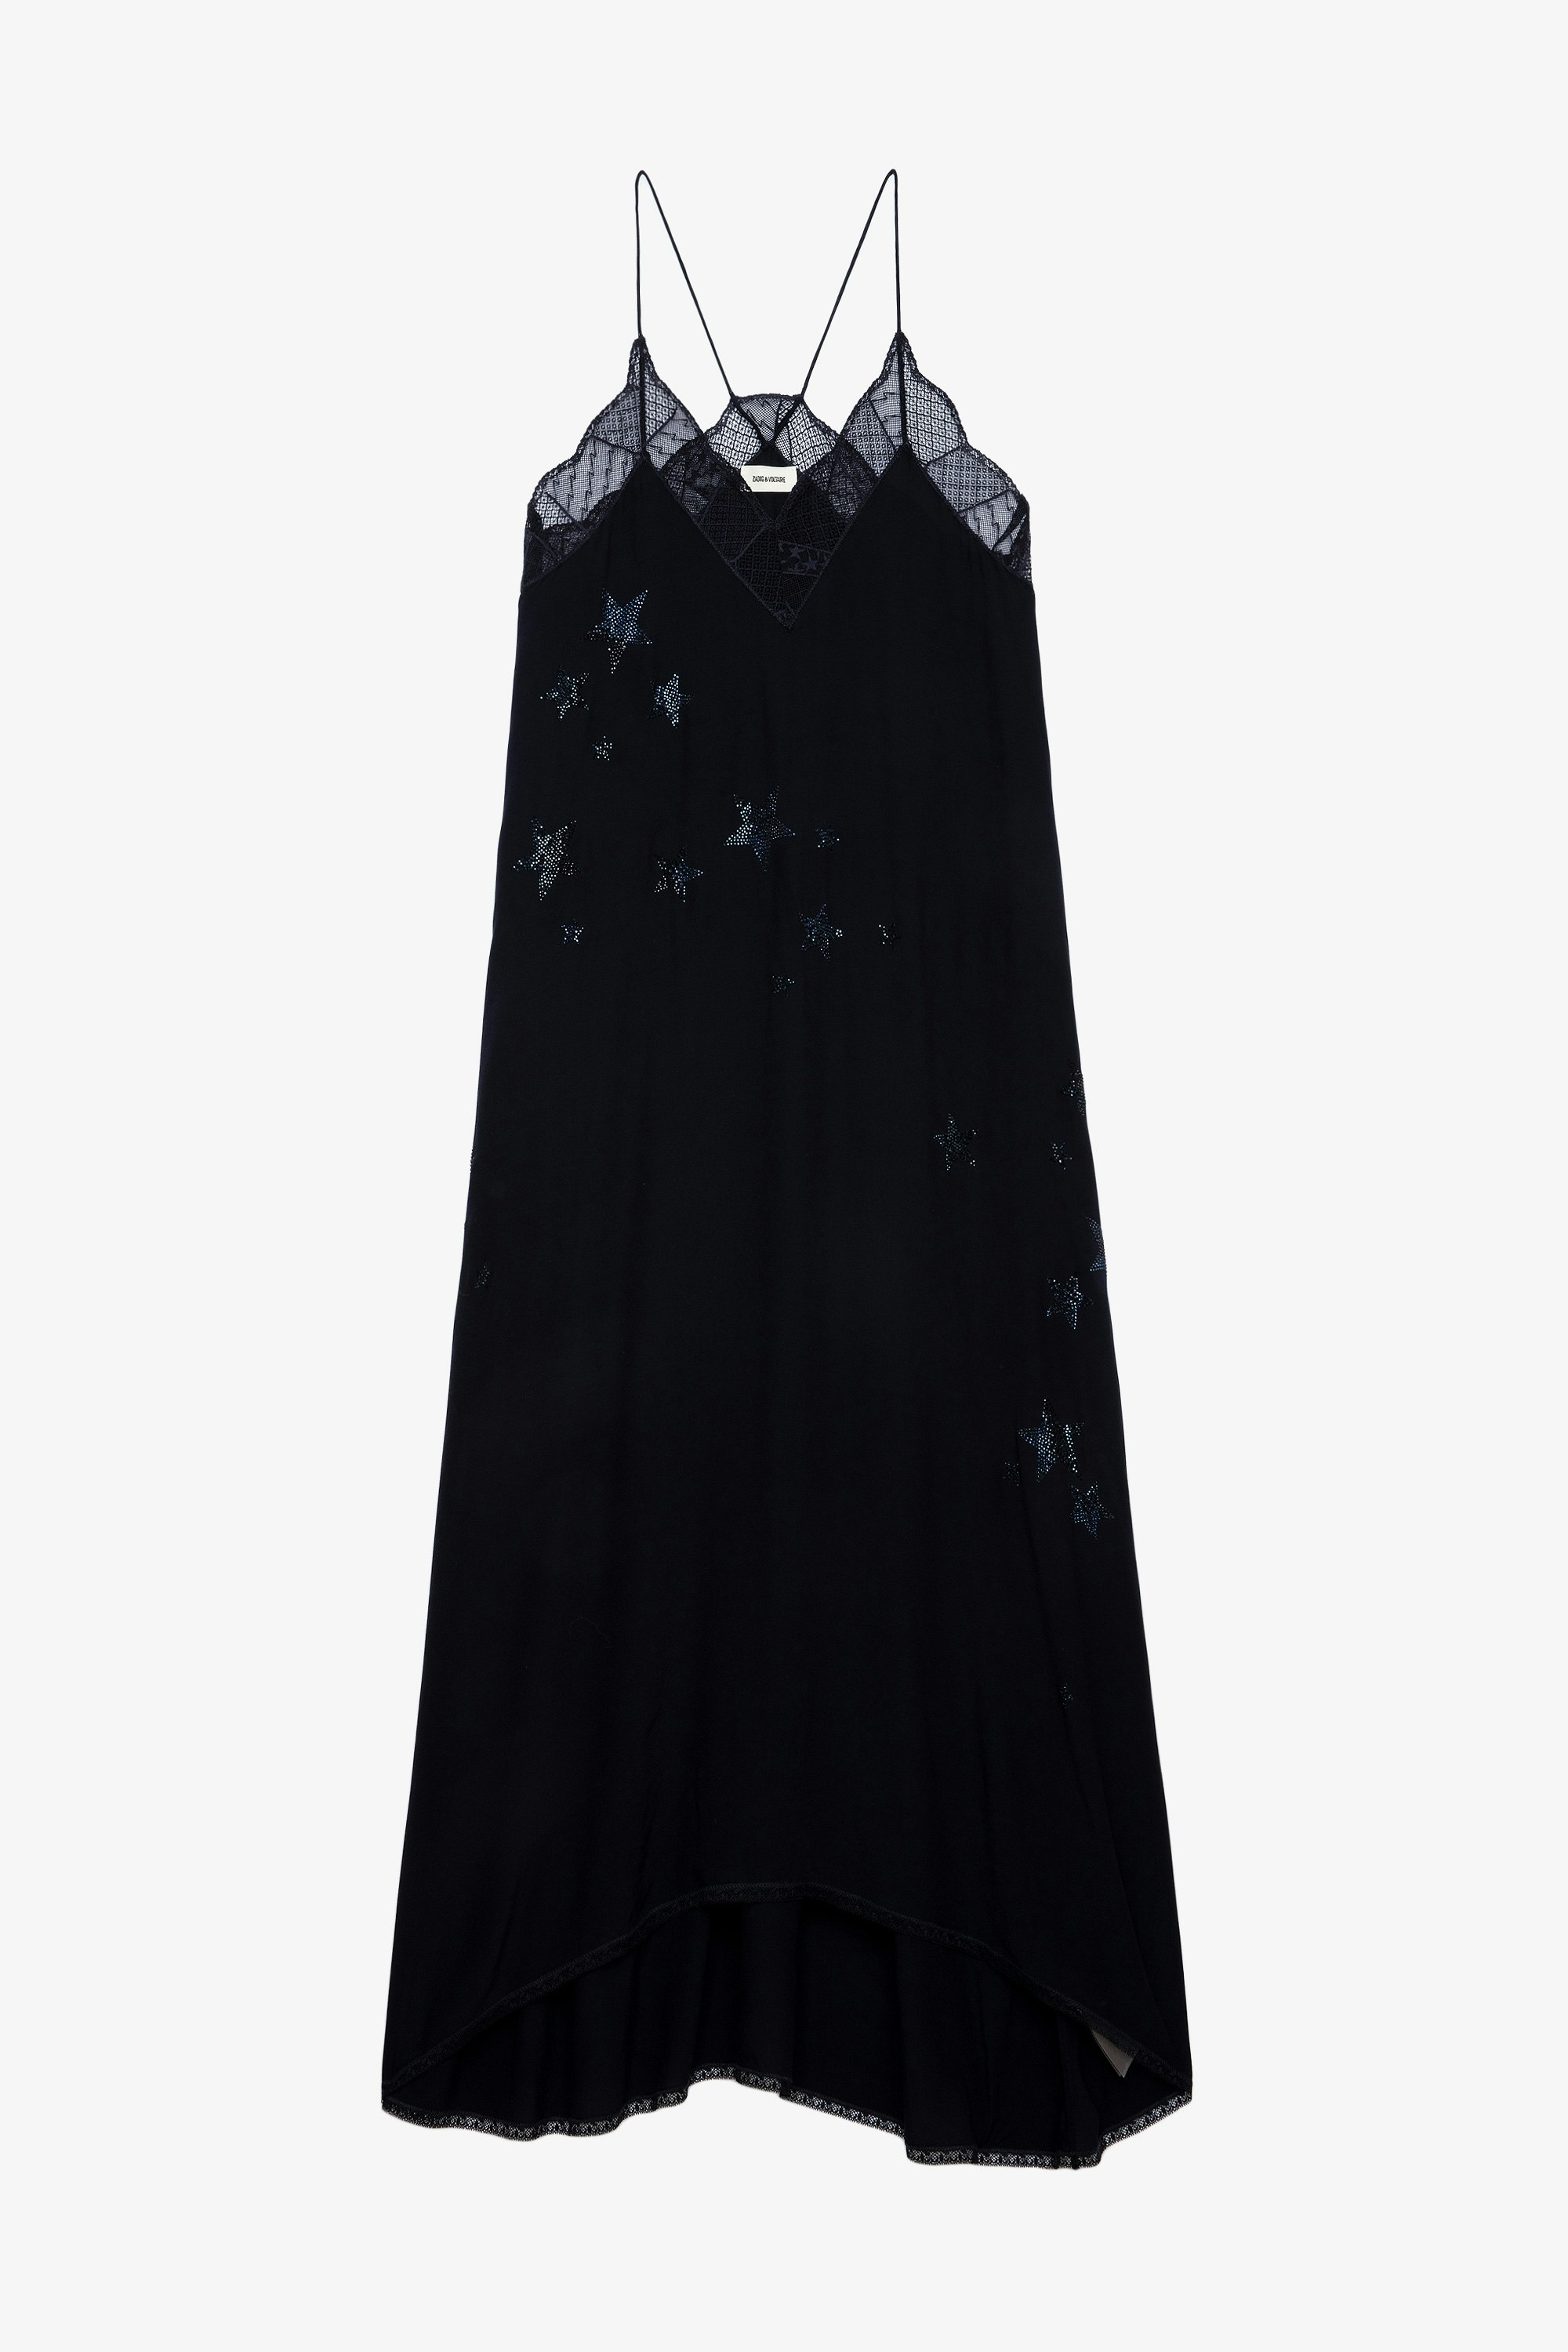 Risty Soft Diamanté Stars ワンピース Women’s navy blue long dress with lace trim and studded with crystal-embellished stars